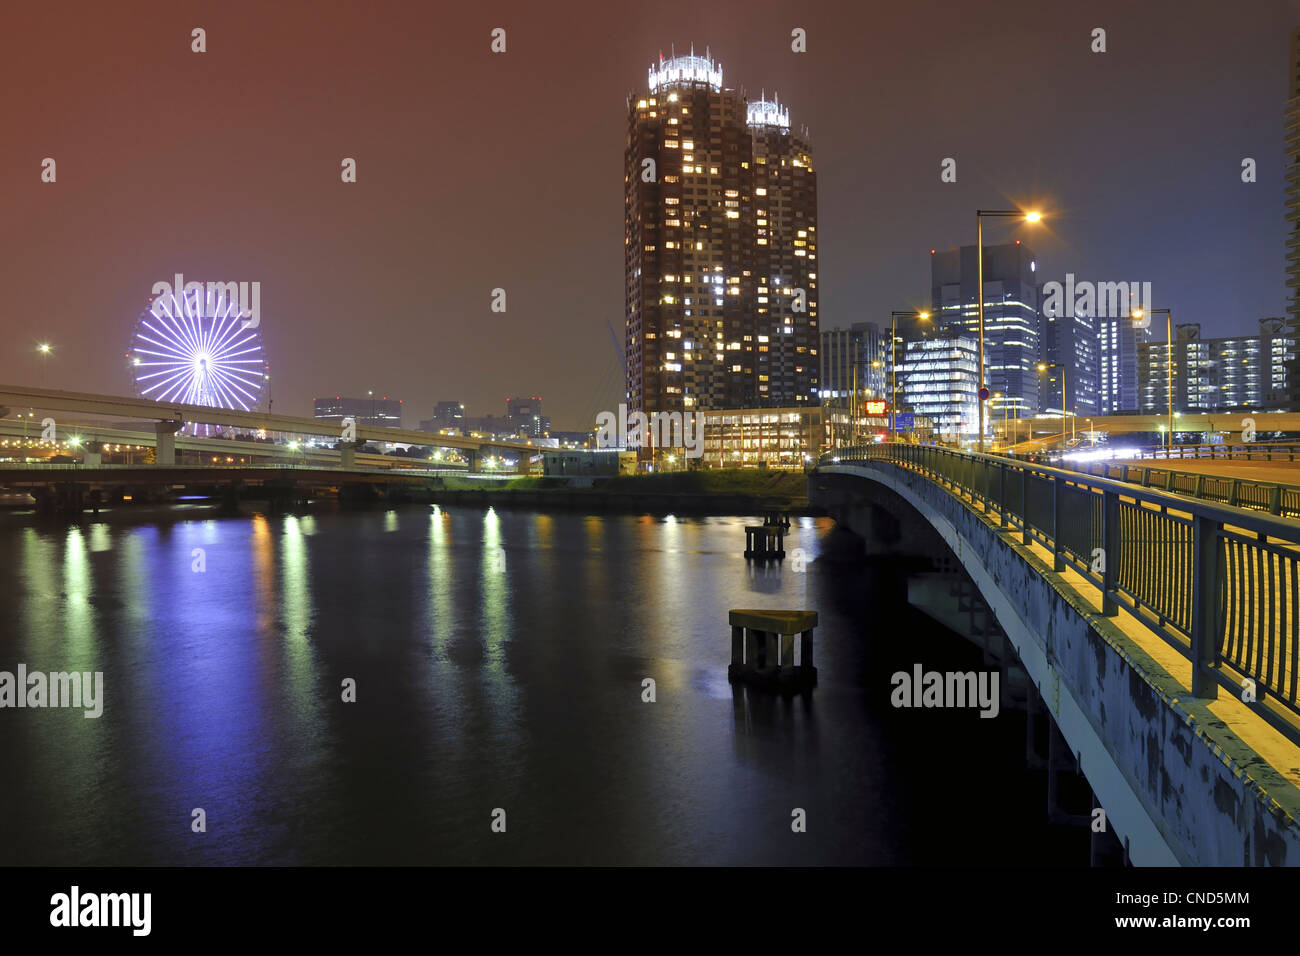 modern city well illuminated by night with scenic water reflection Stock Photo